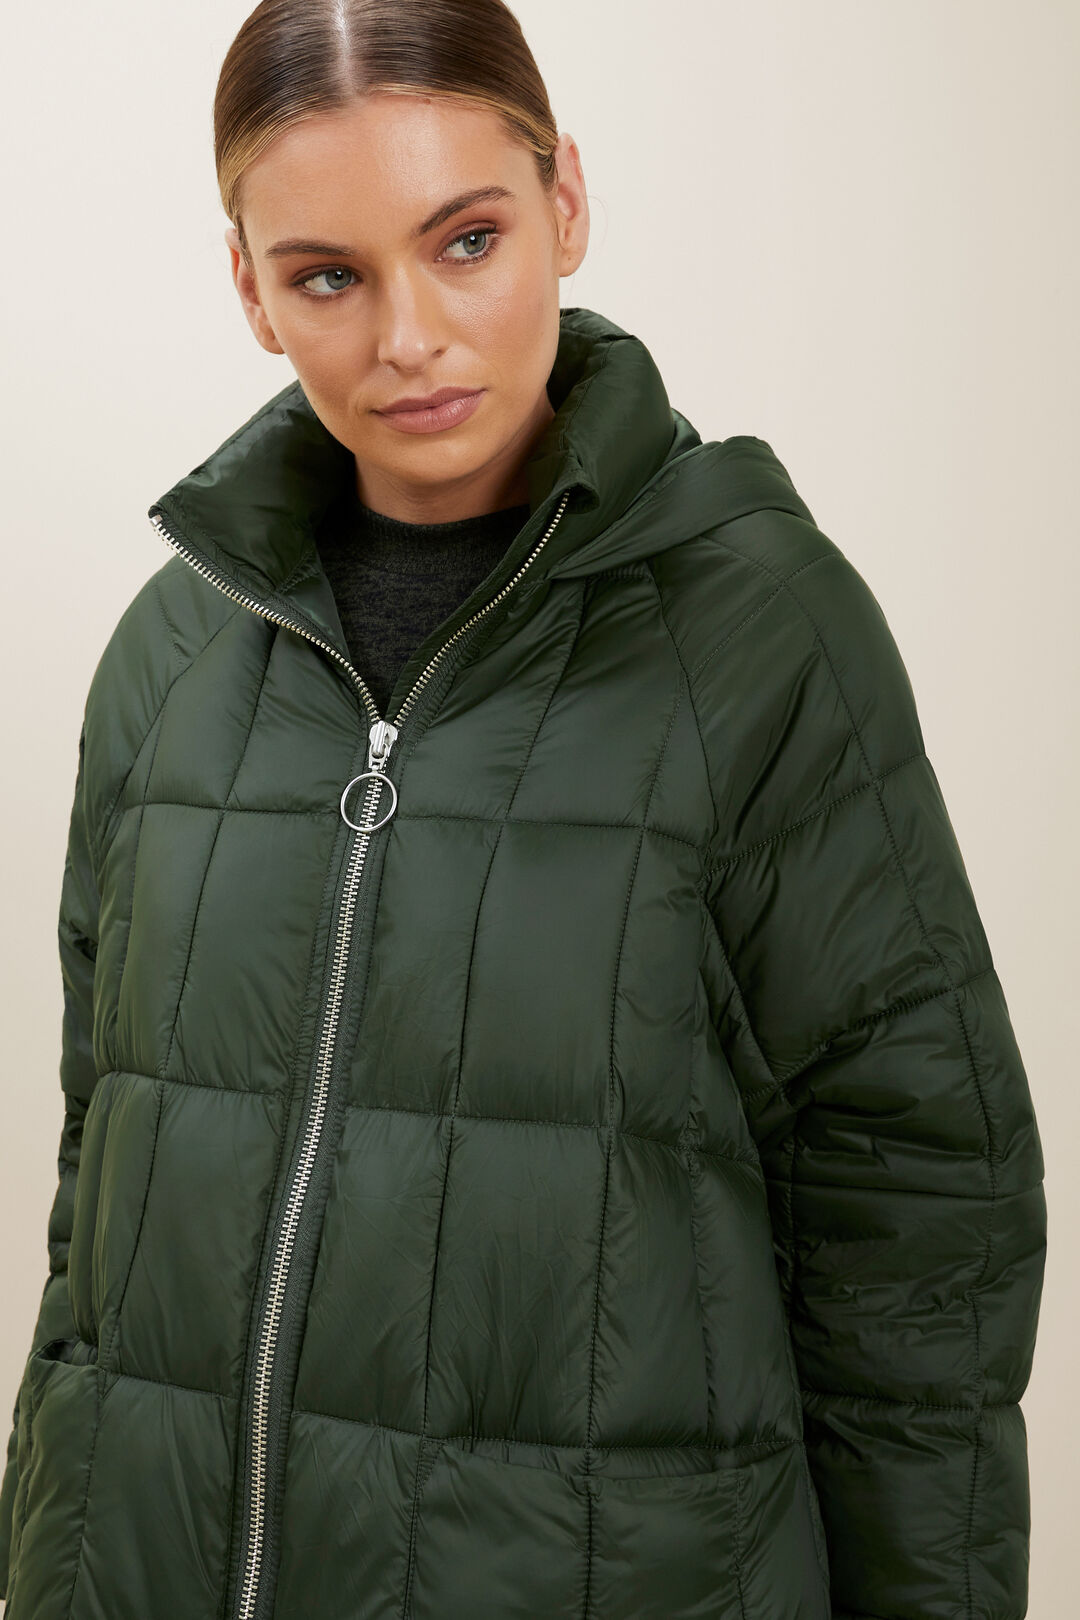 Quilted A-Line Puffer Jacket  Basil  hi-res